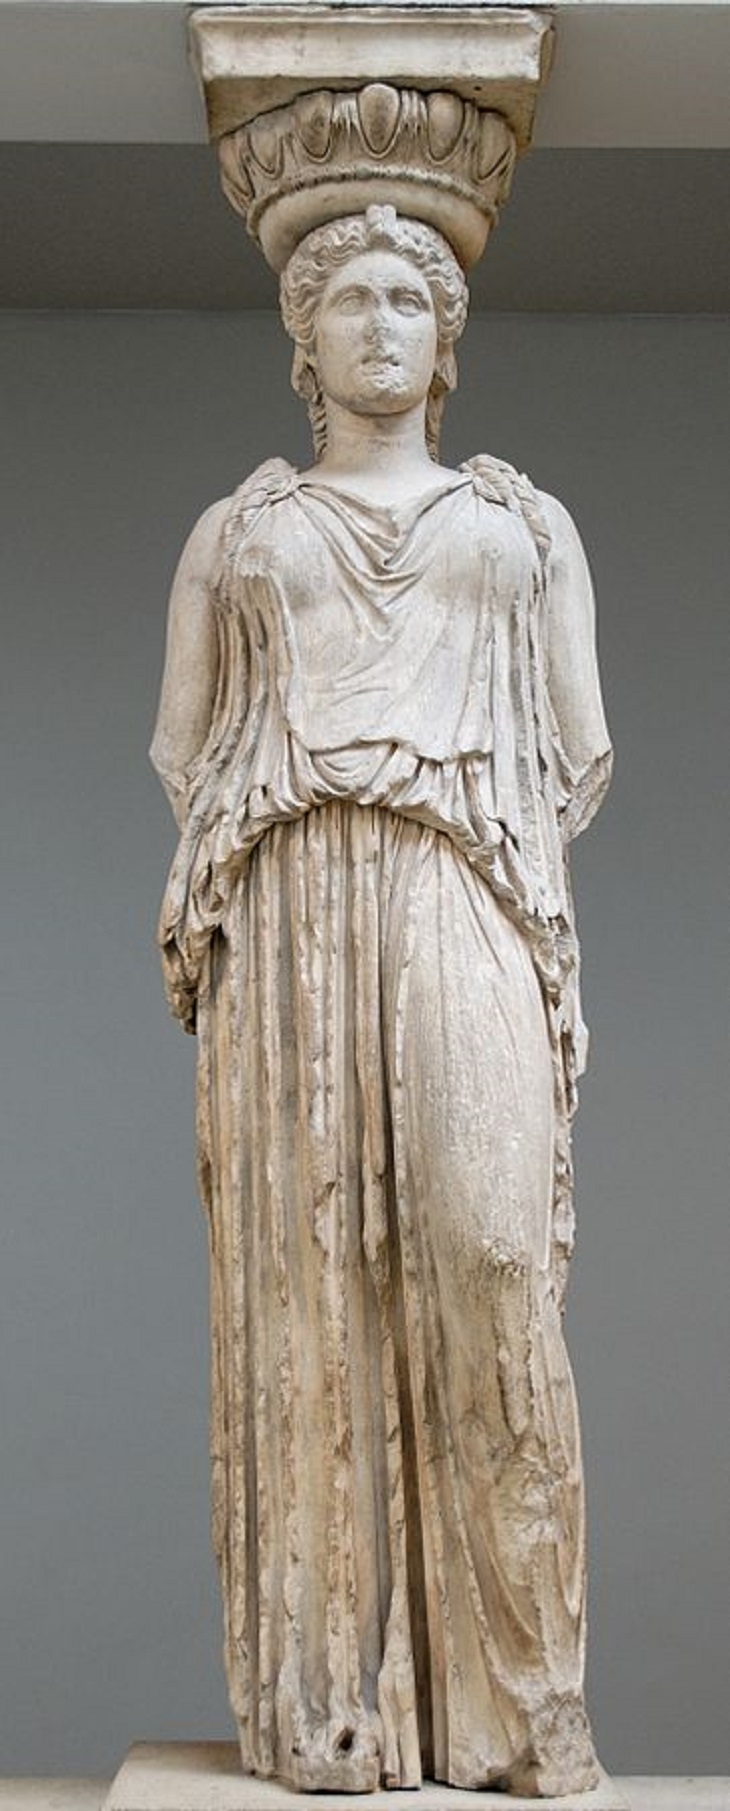 A statue wearing the classic chiton